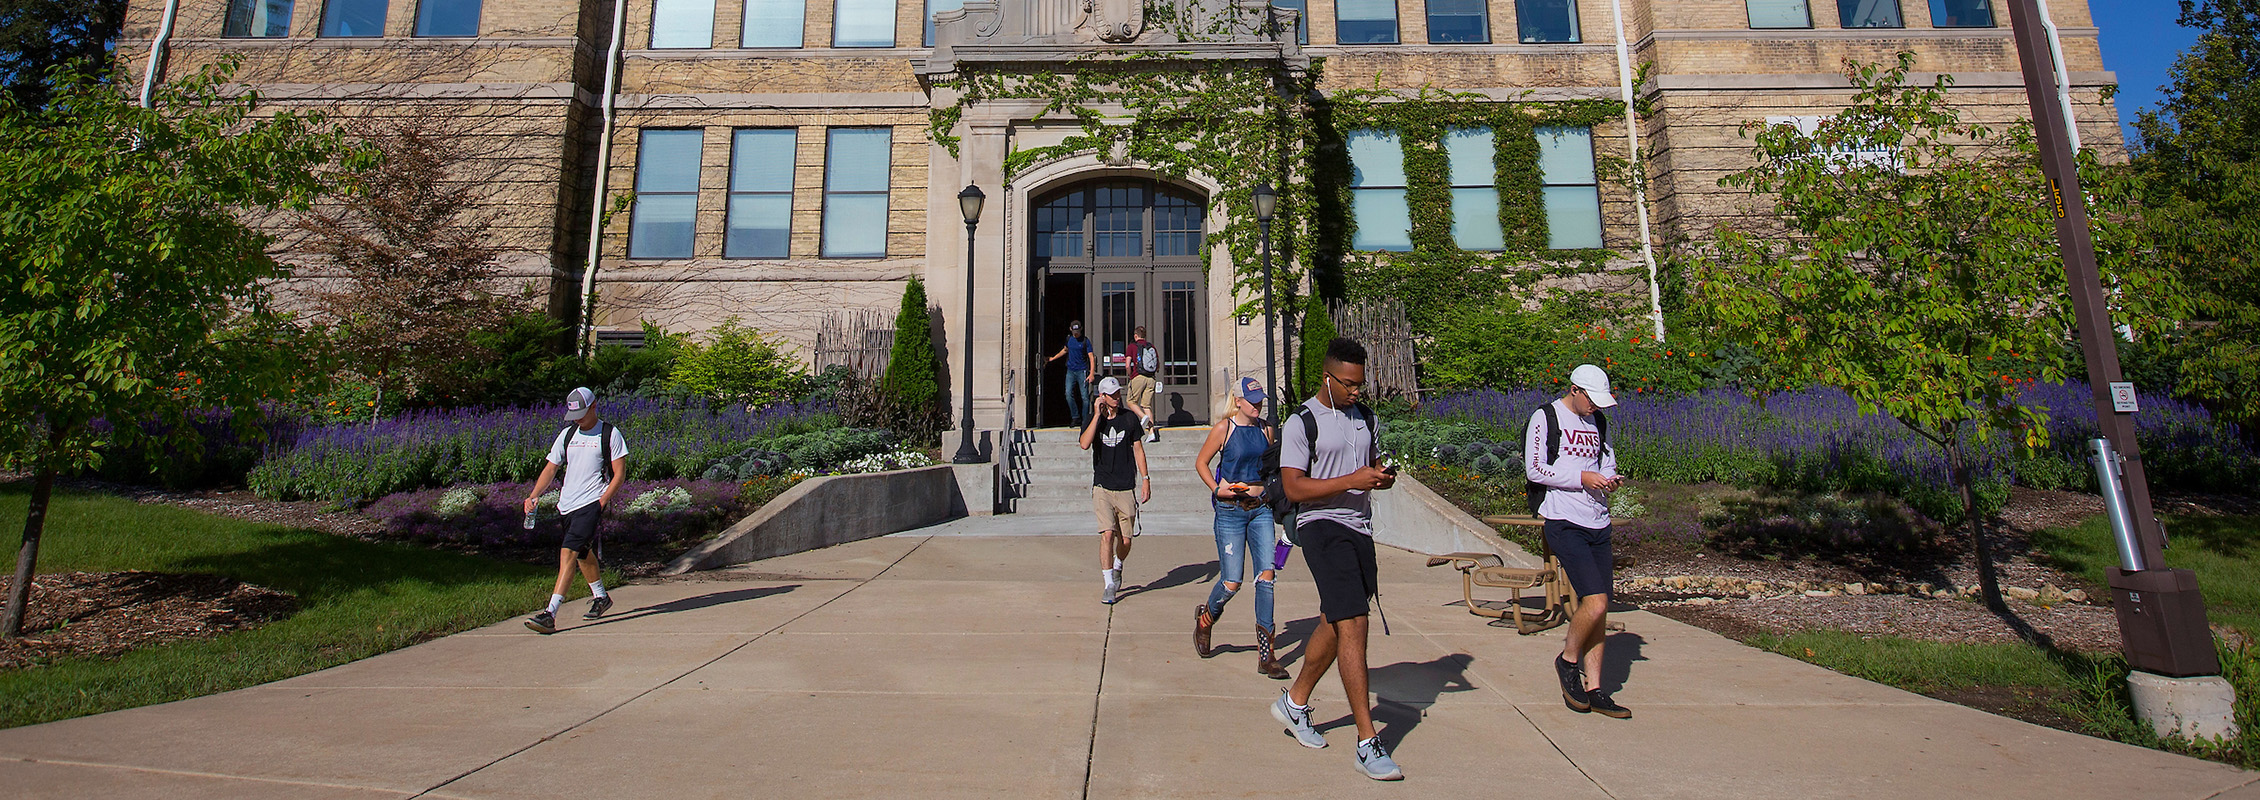 UW-Whitewater students enrolling in classes